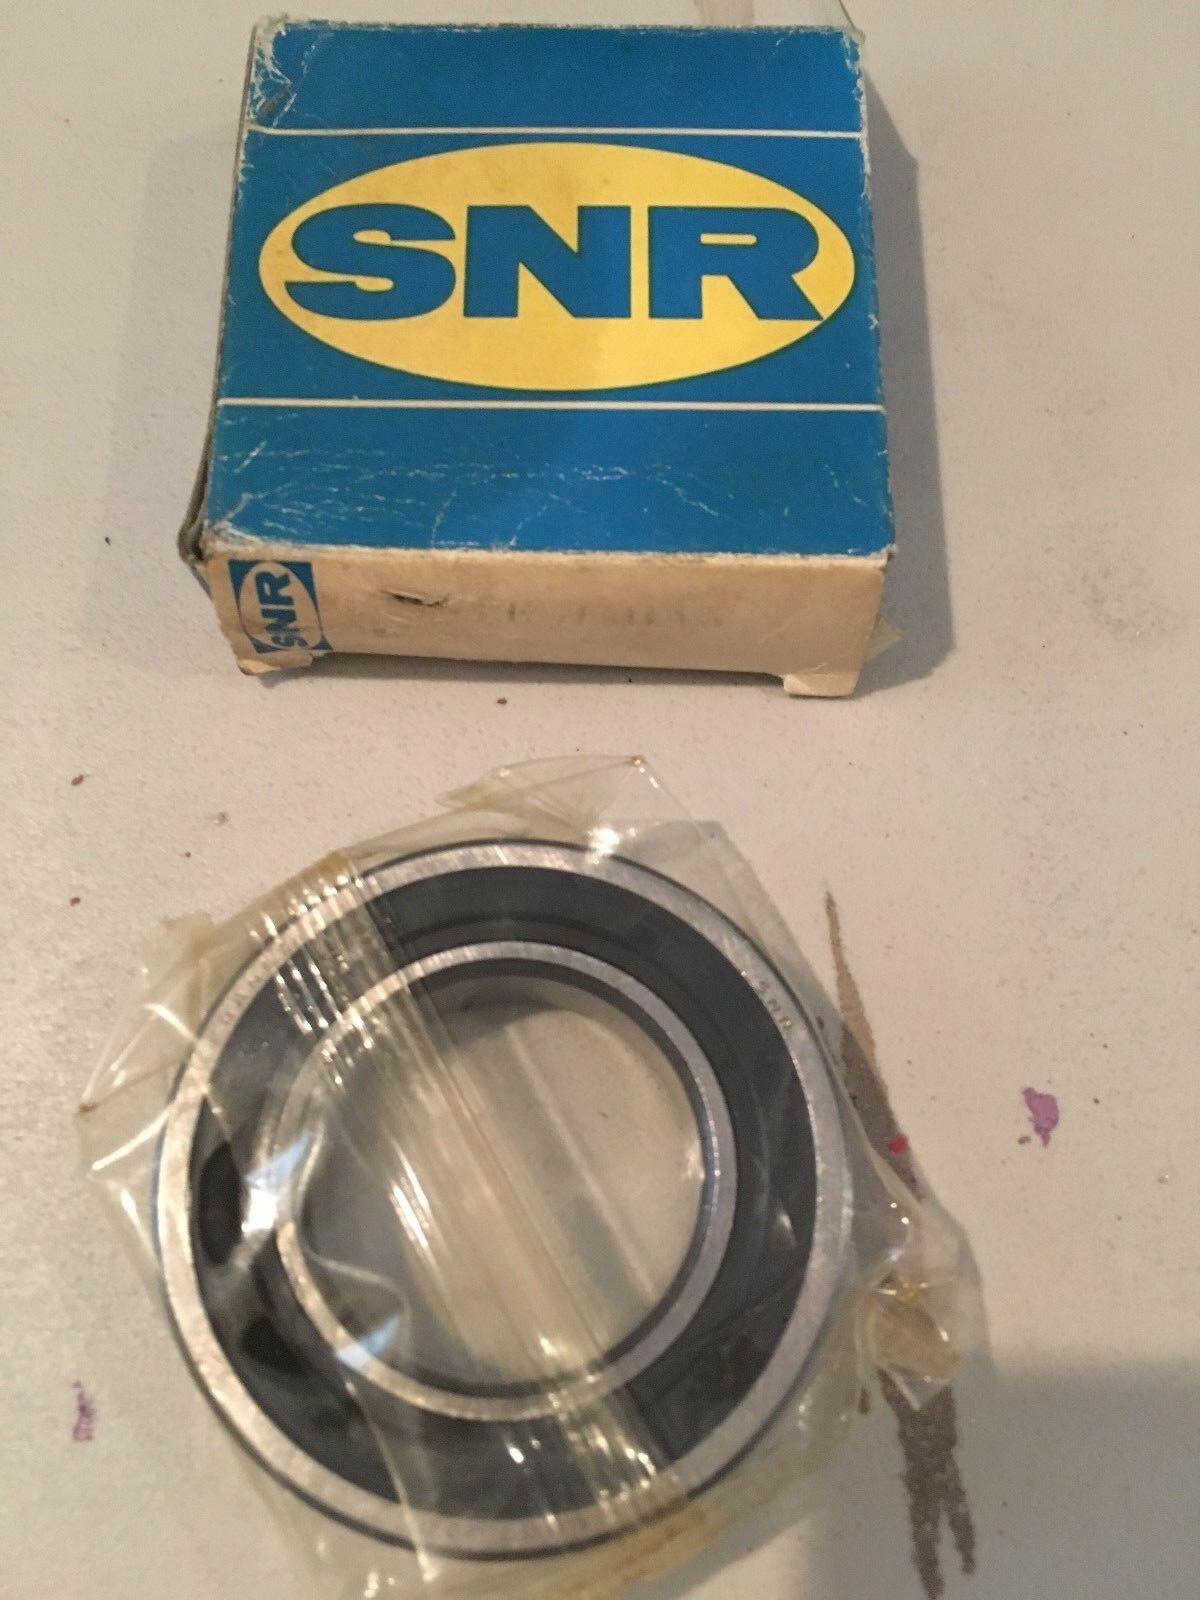 NEW IN BOX SNR BEARING 6007 EE J30A50